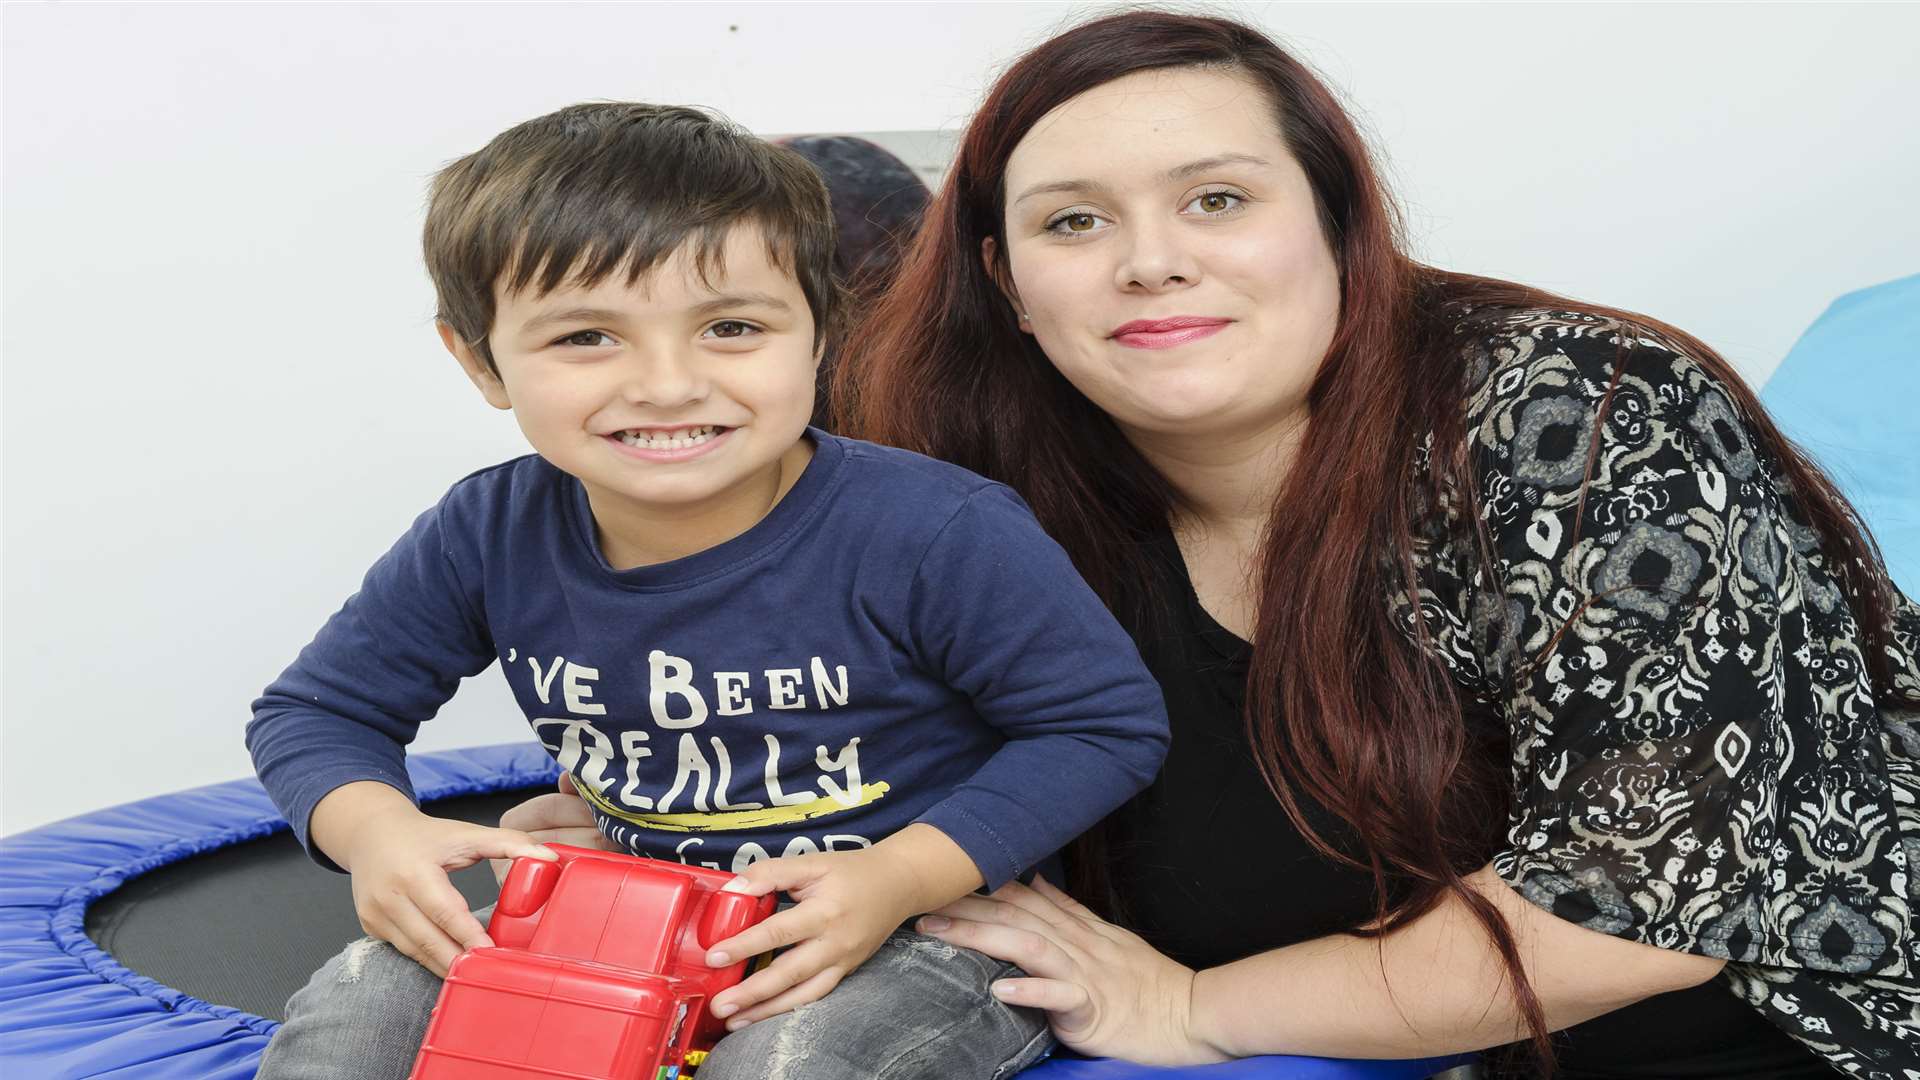 Gemma Bird, of Monk's Court, Maidstone, is raising money to take autistic son Edison Osmani, 3, to America for a programme to improve his communication skills